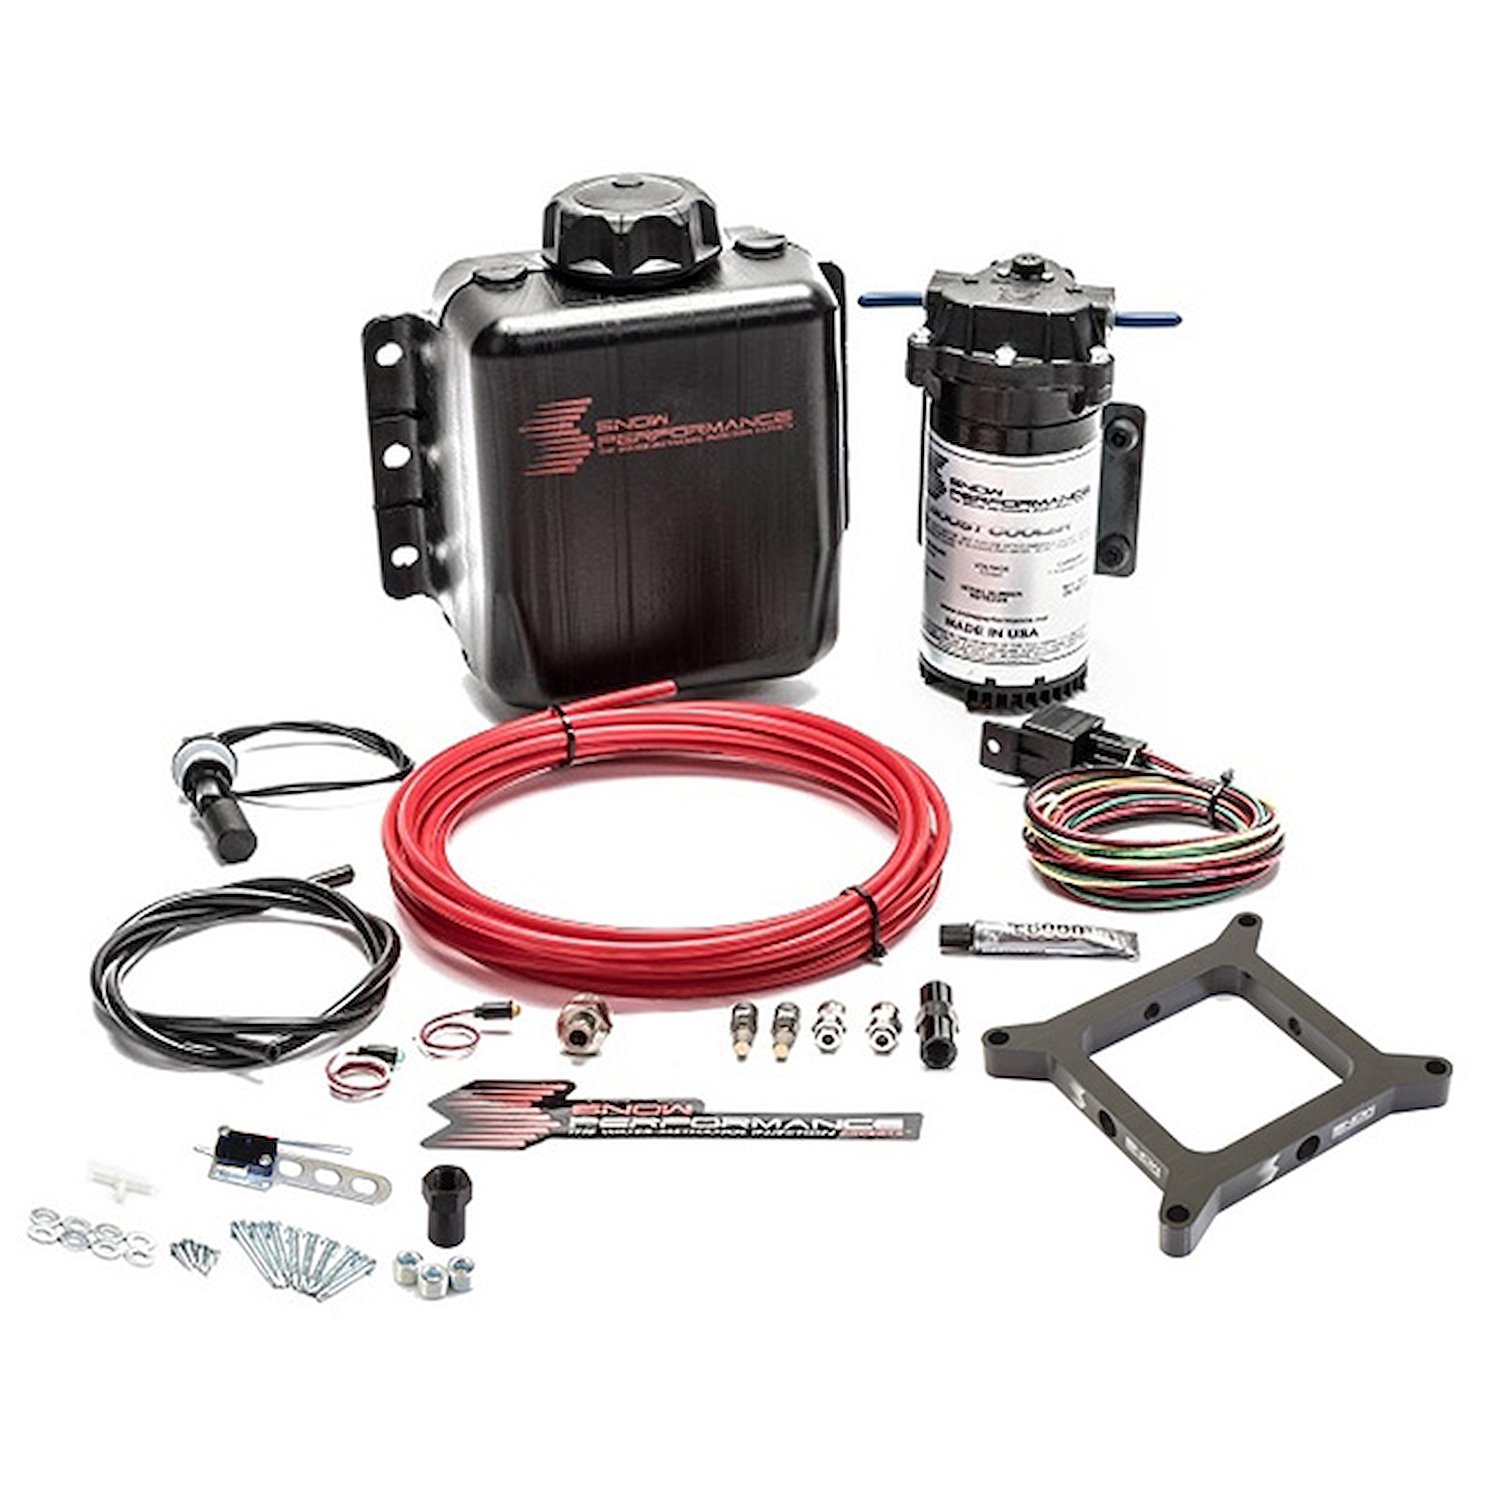 Snow Performance 15025: Stage 1 Water/Methanol Injection Kit Naturally- Aspirated V8 Engine |4150-style Carburetor| - JEGS